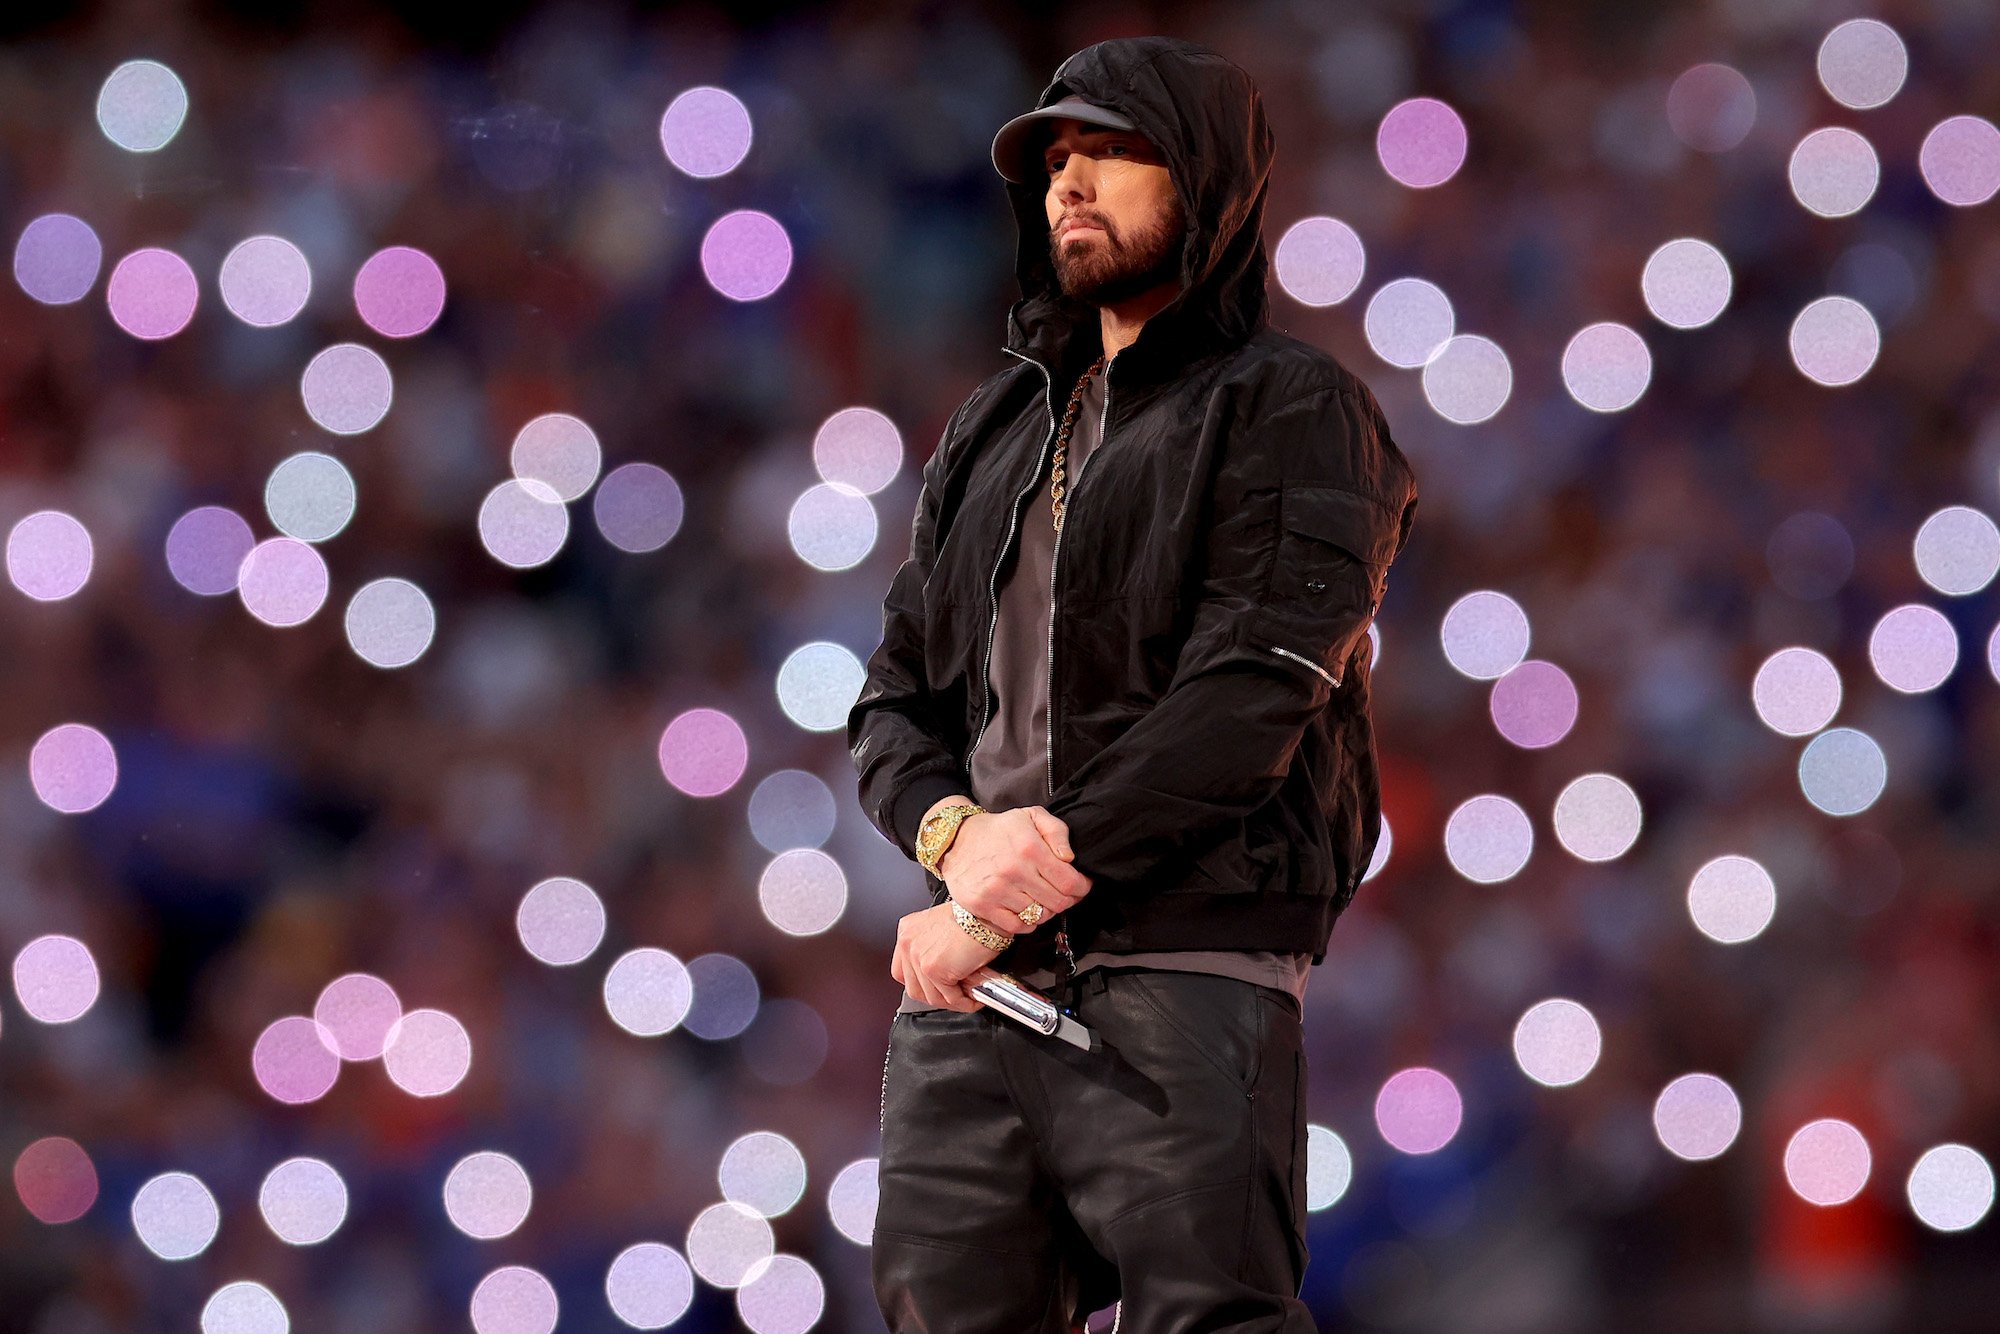 Eminem, whose writing process has changed a lot over the years, performing in a black leather jacket